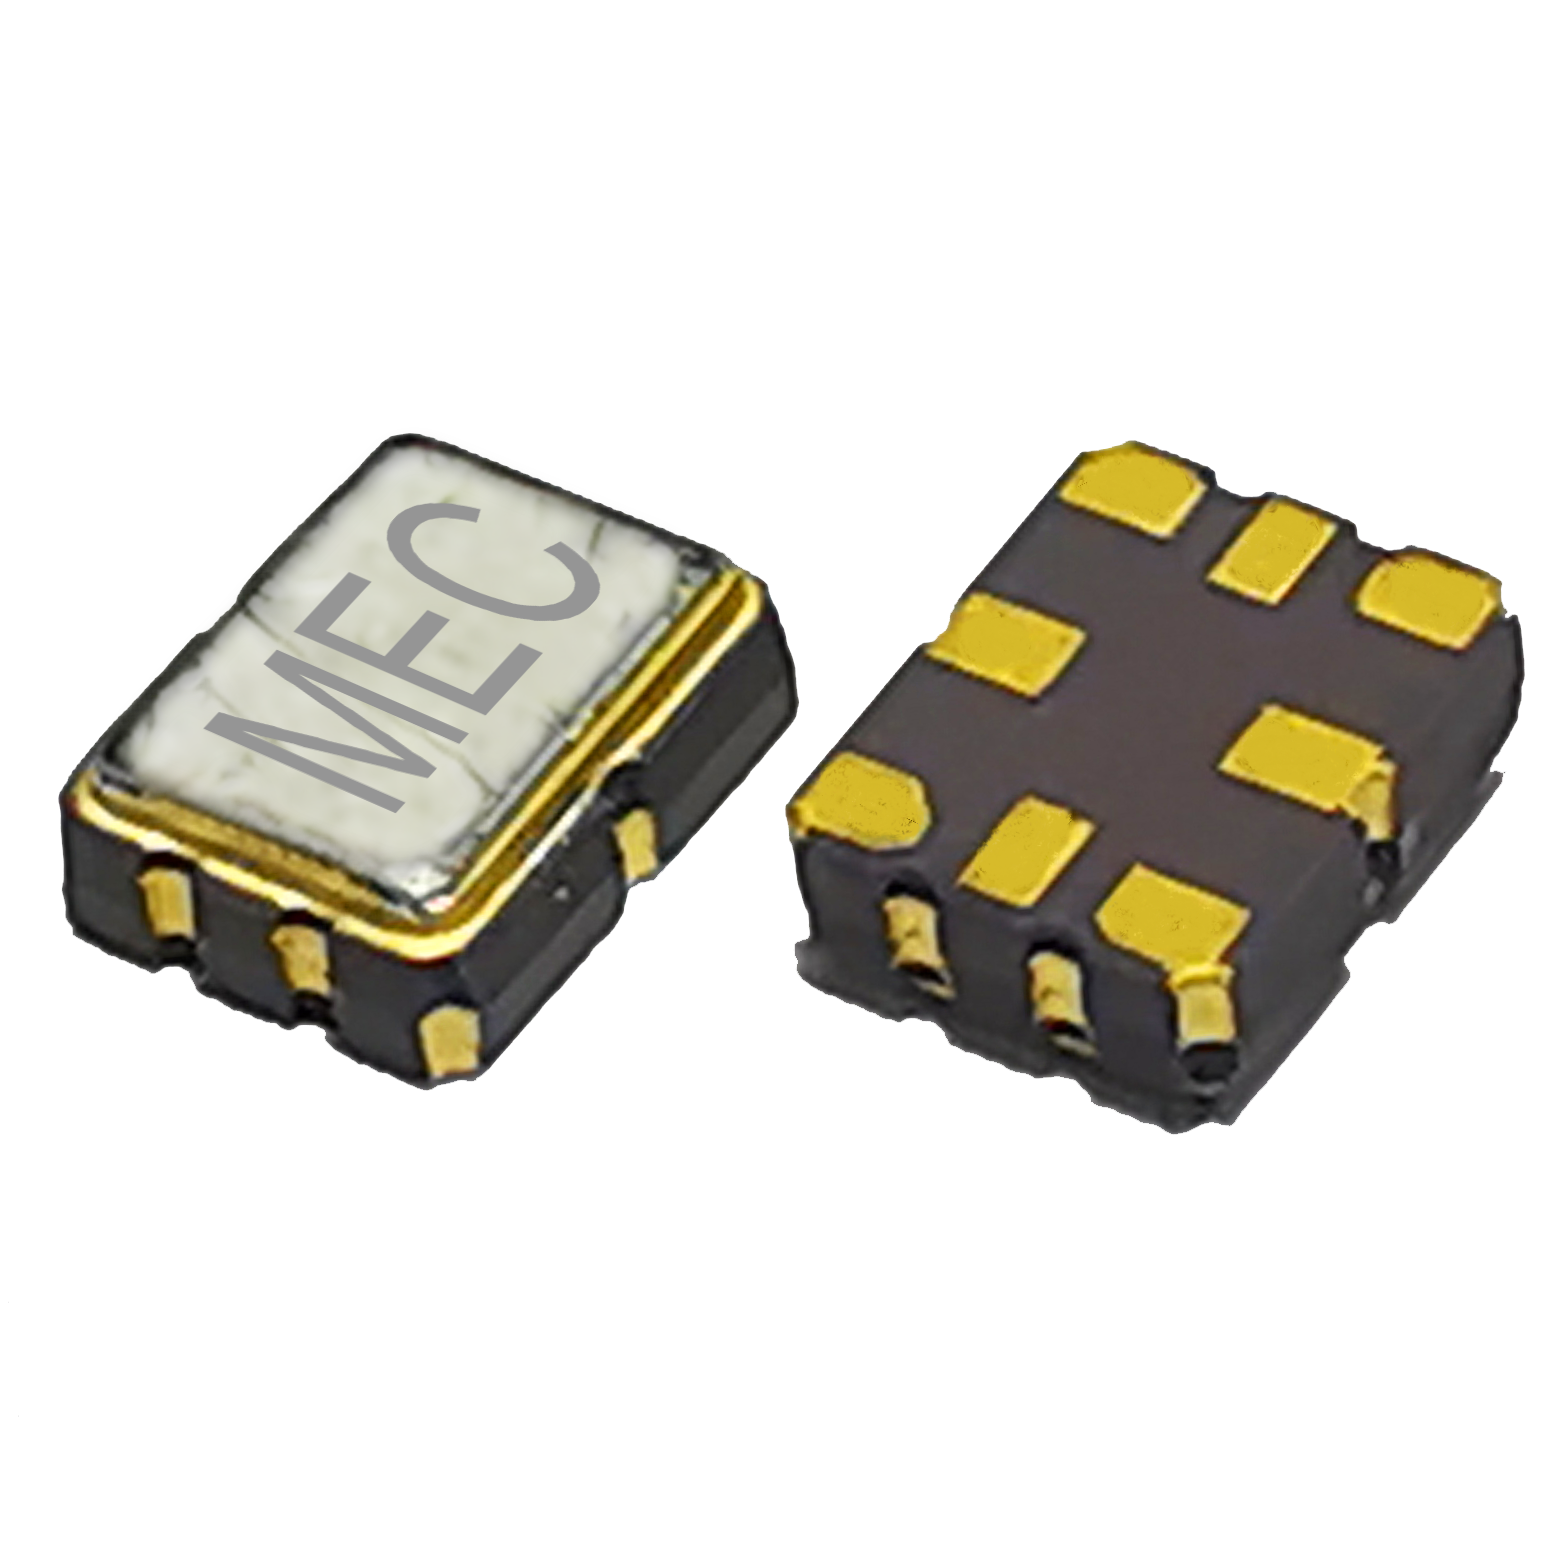 HQJF328 3225 3.3V Ultra Low Jitter Quick-turn Programmable Differential CML SMD Crystal Oscillator